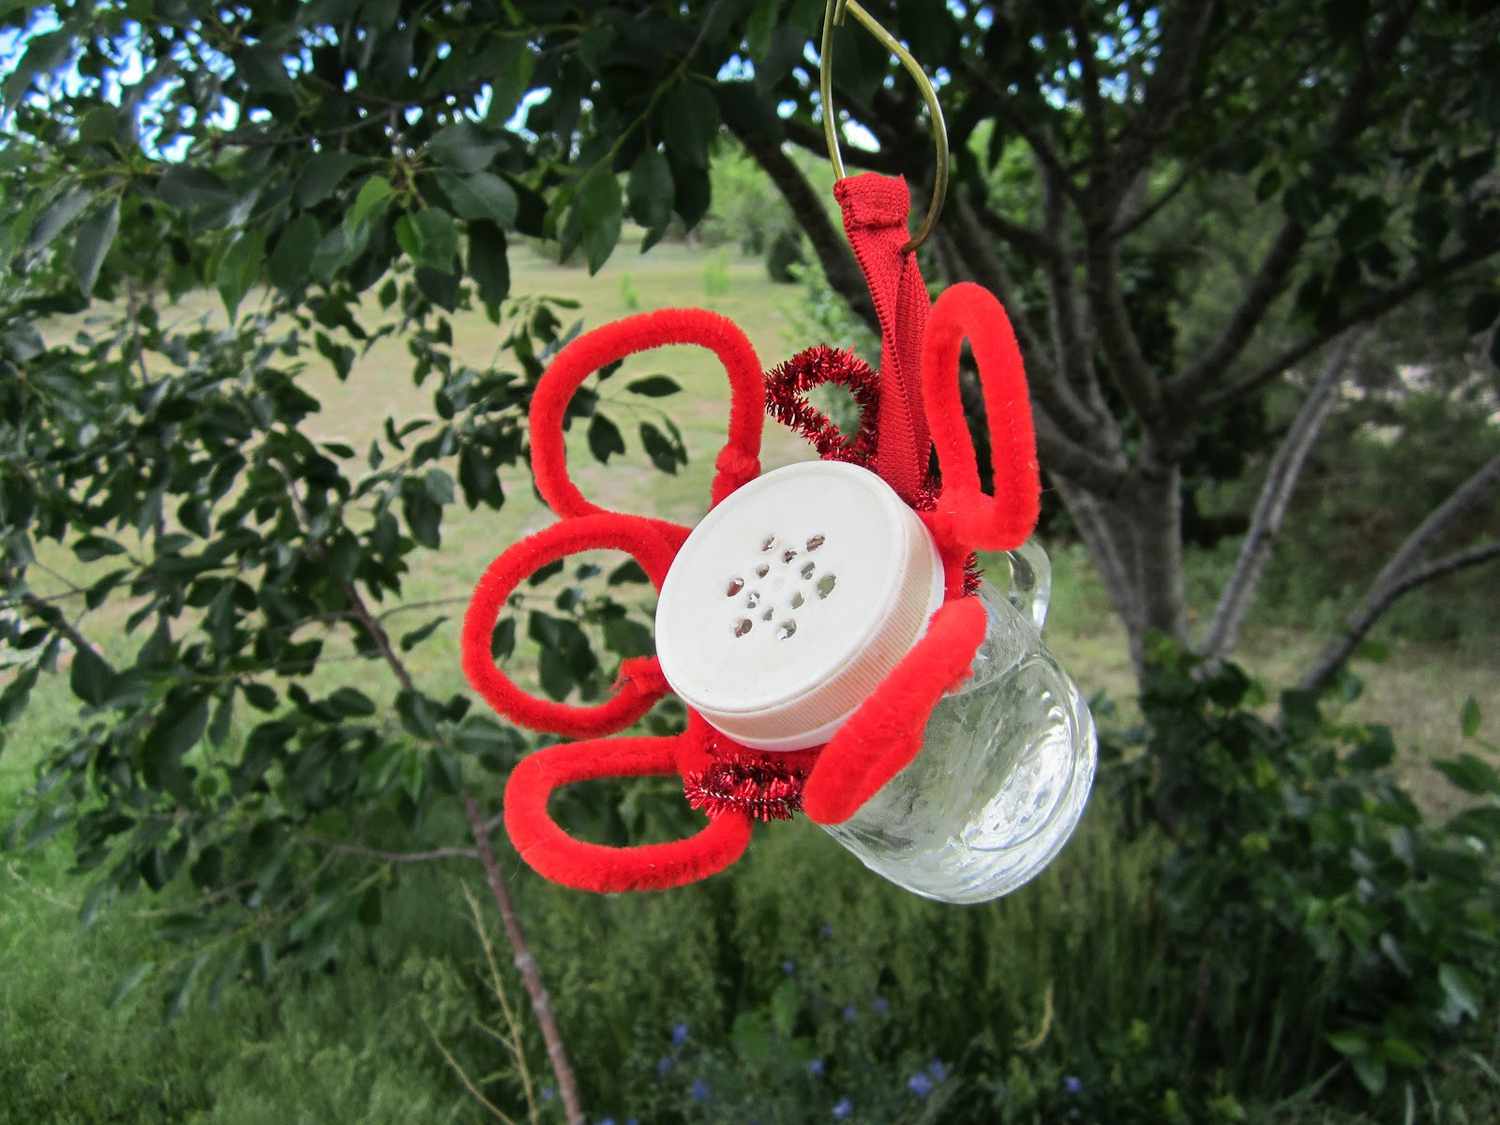 A small hummingbird feeder hanging from a tree